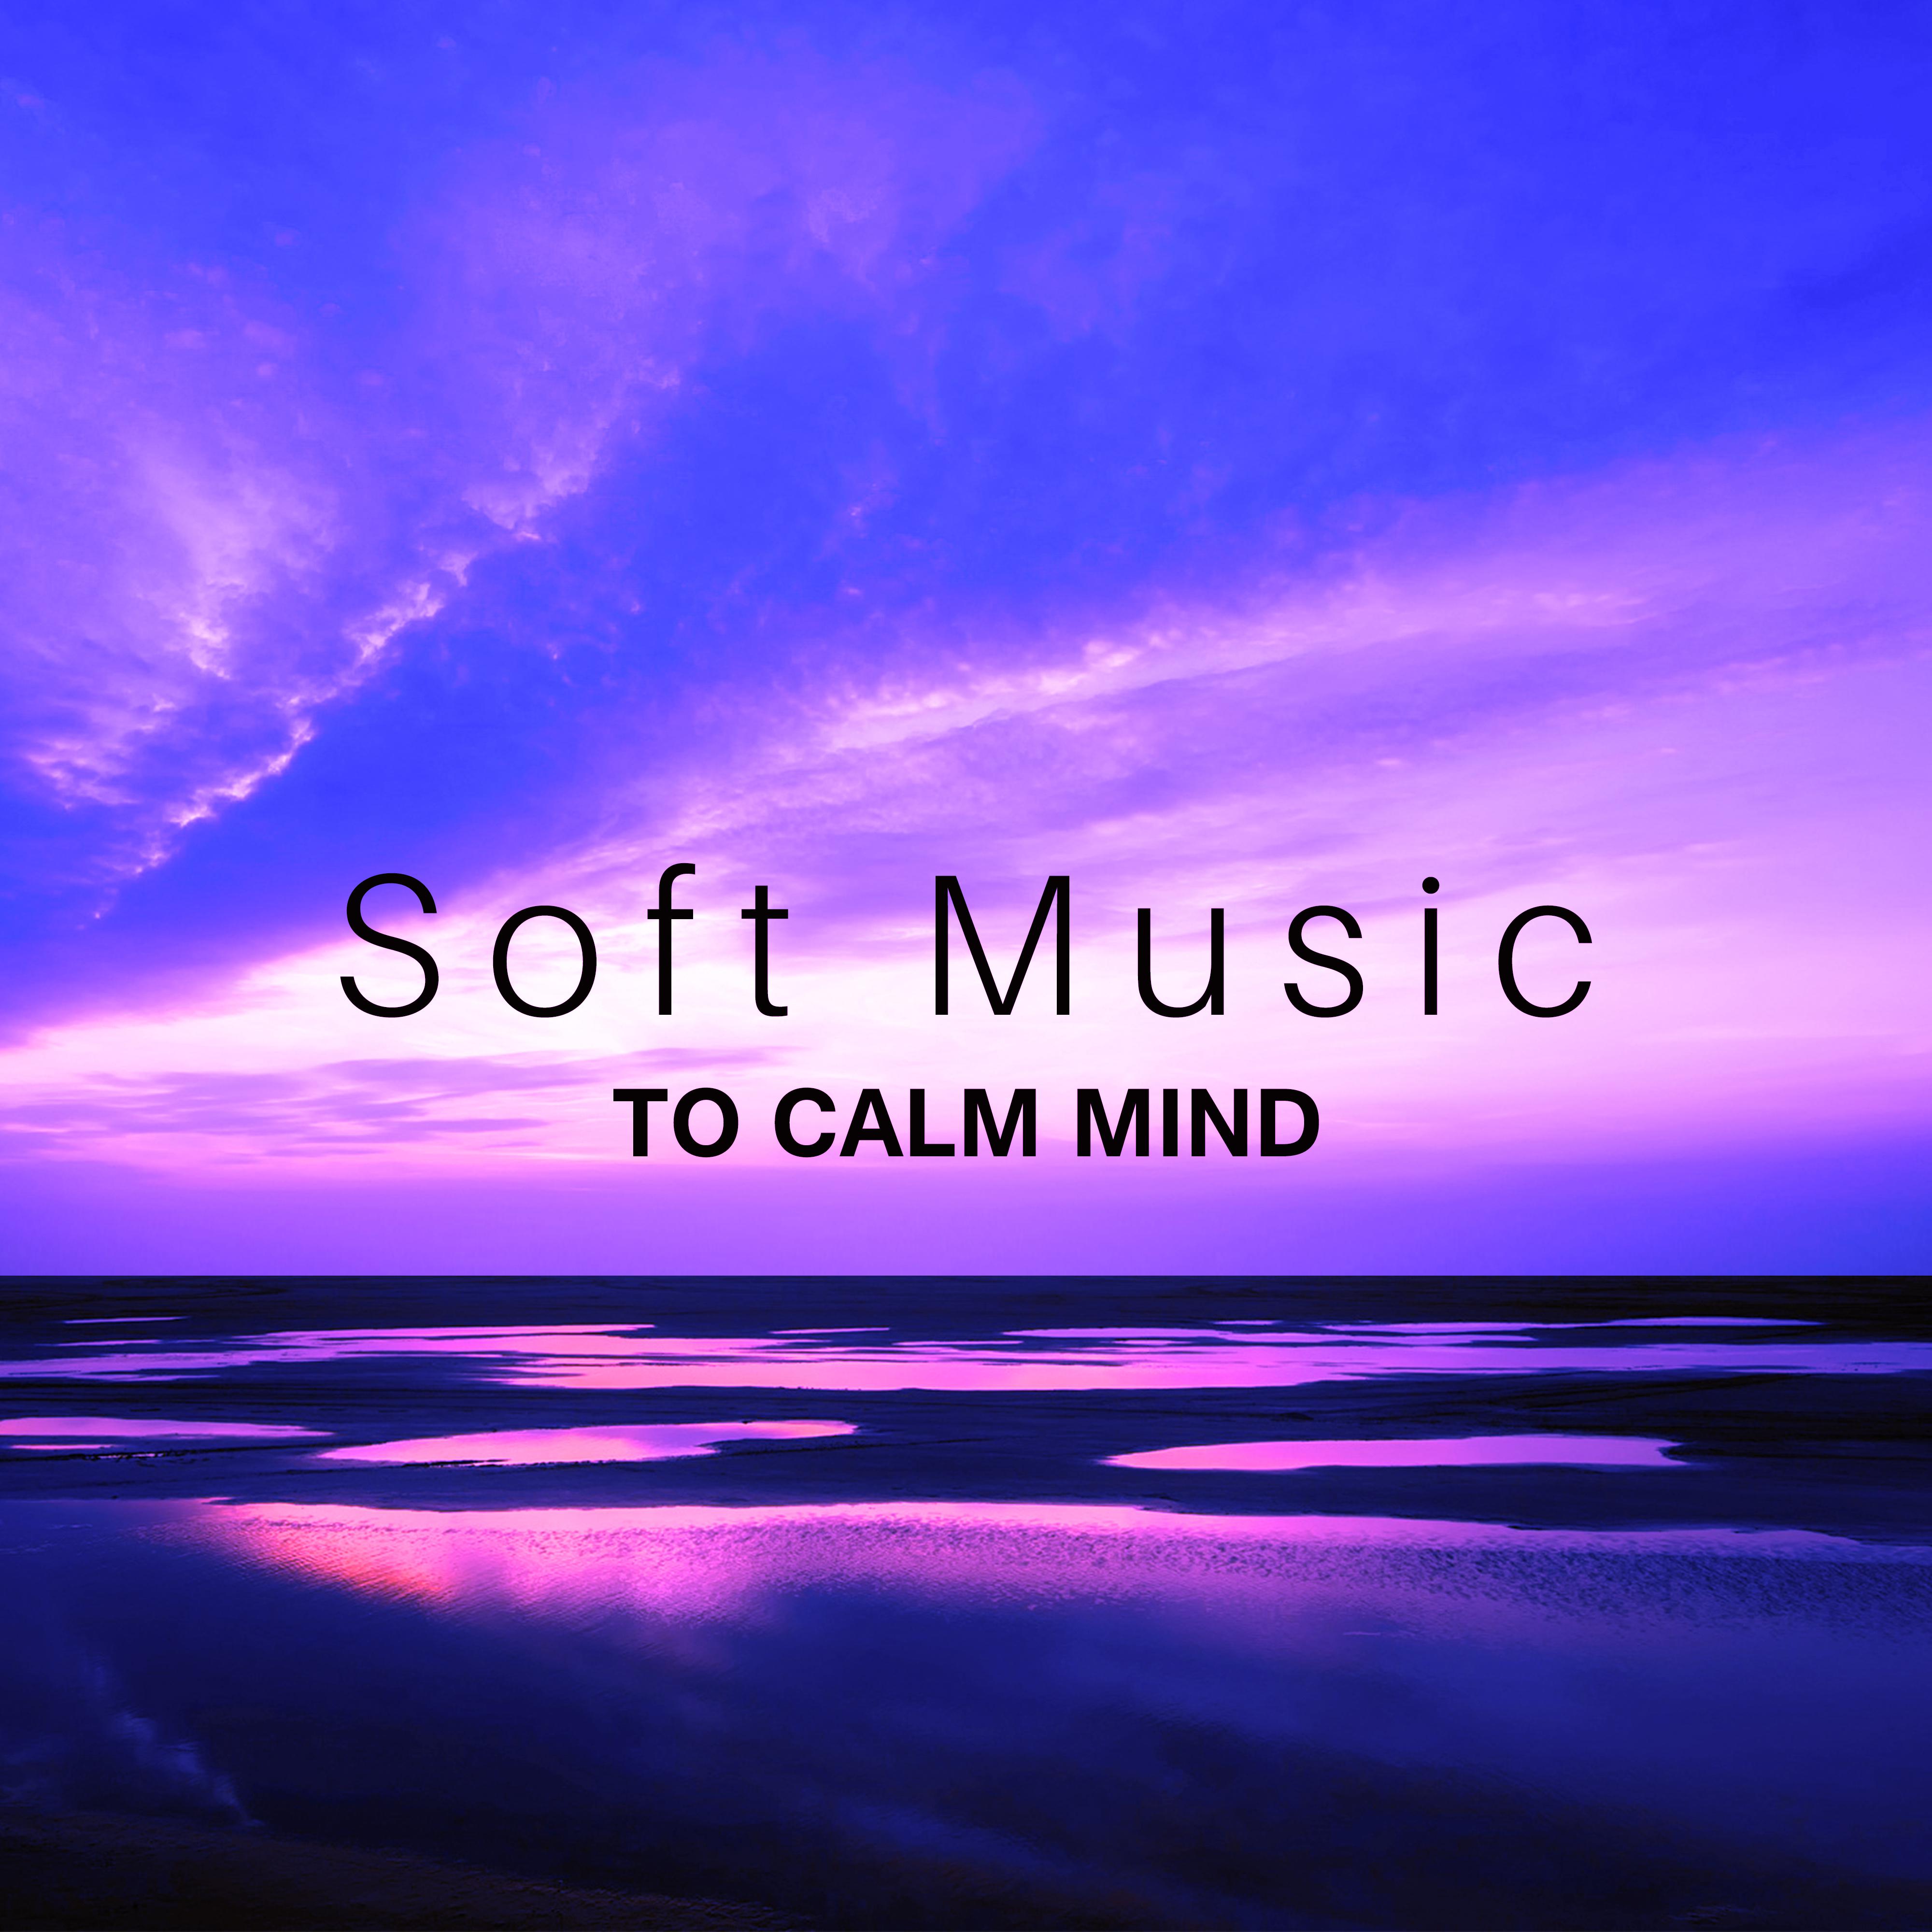 Soft Music to Calm Mind  Relaxing New Age Music, Peaceful Waves, Sounds to Help You Rest